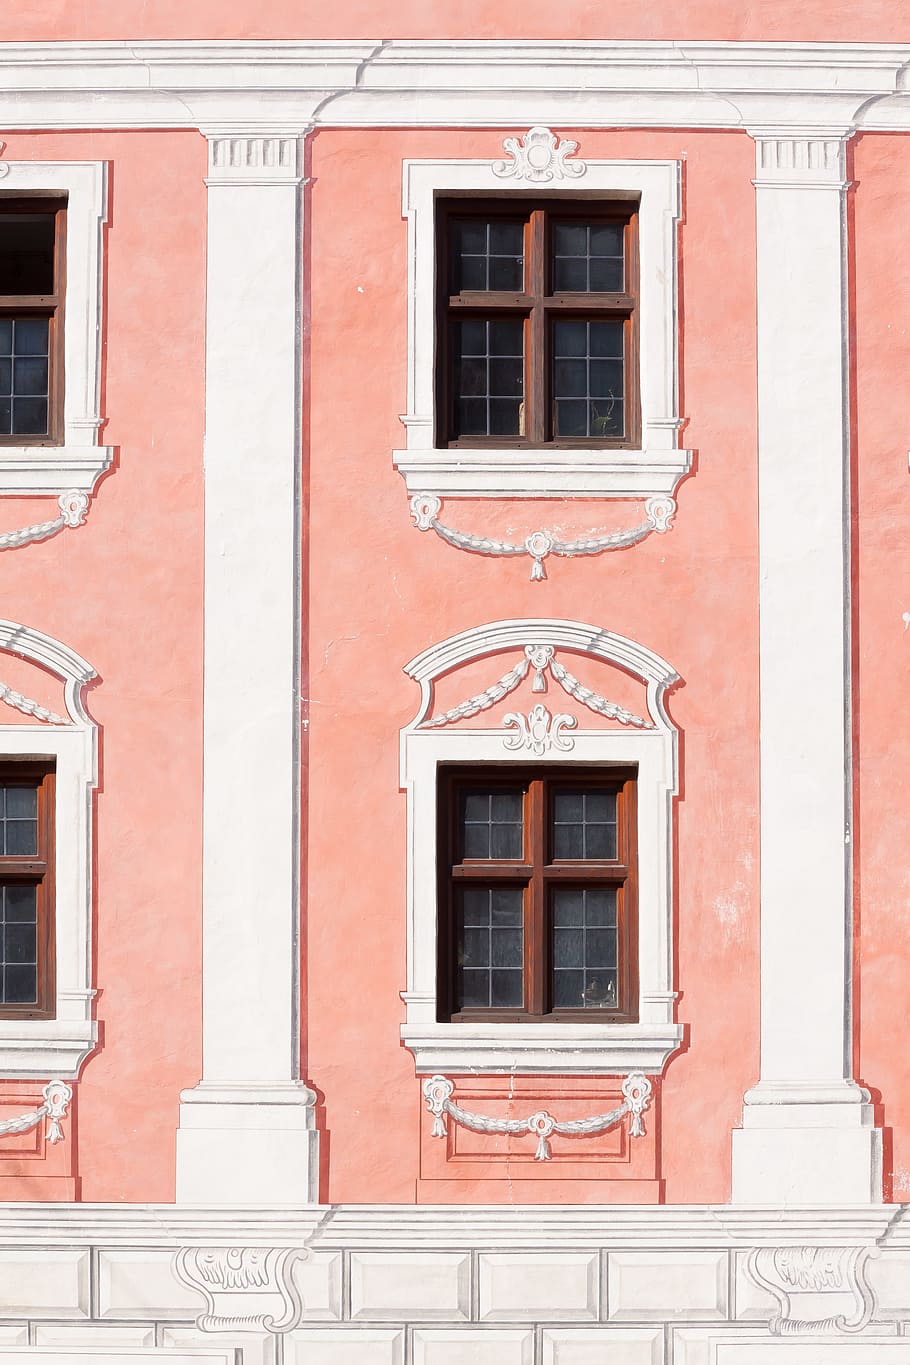 facade, dusky pink, window, painting, white, decor, home, building, architecture, hauswand